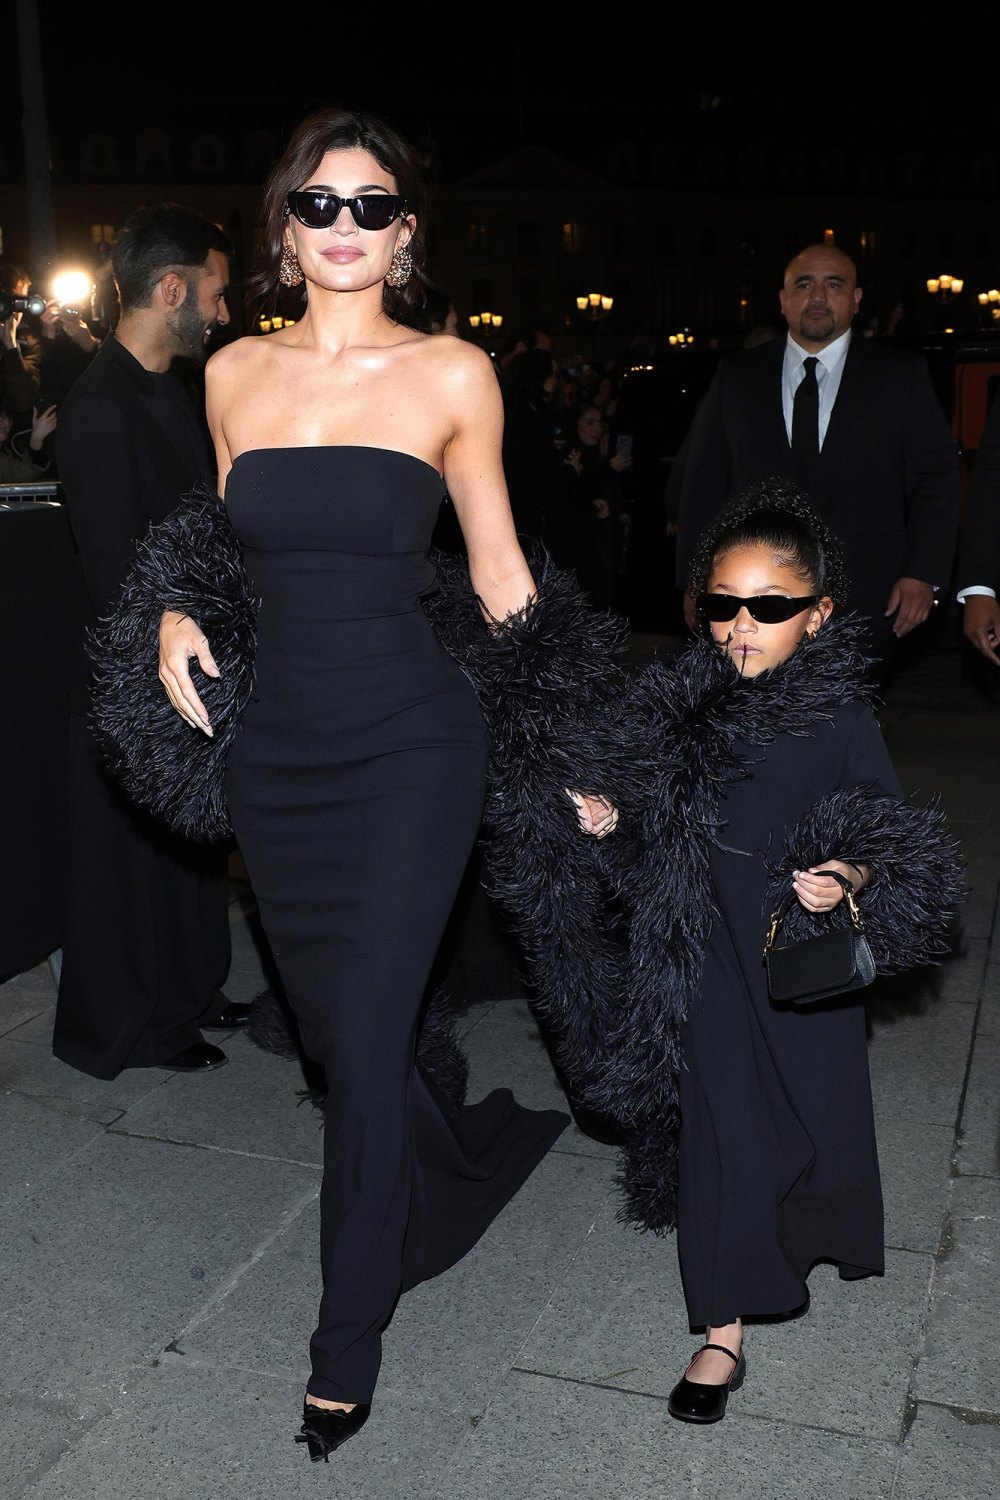 Kylie Jenner and Daughter Stormi Are a Must See in Matching Dresses at Paris Fashion Week